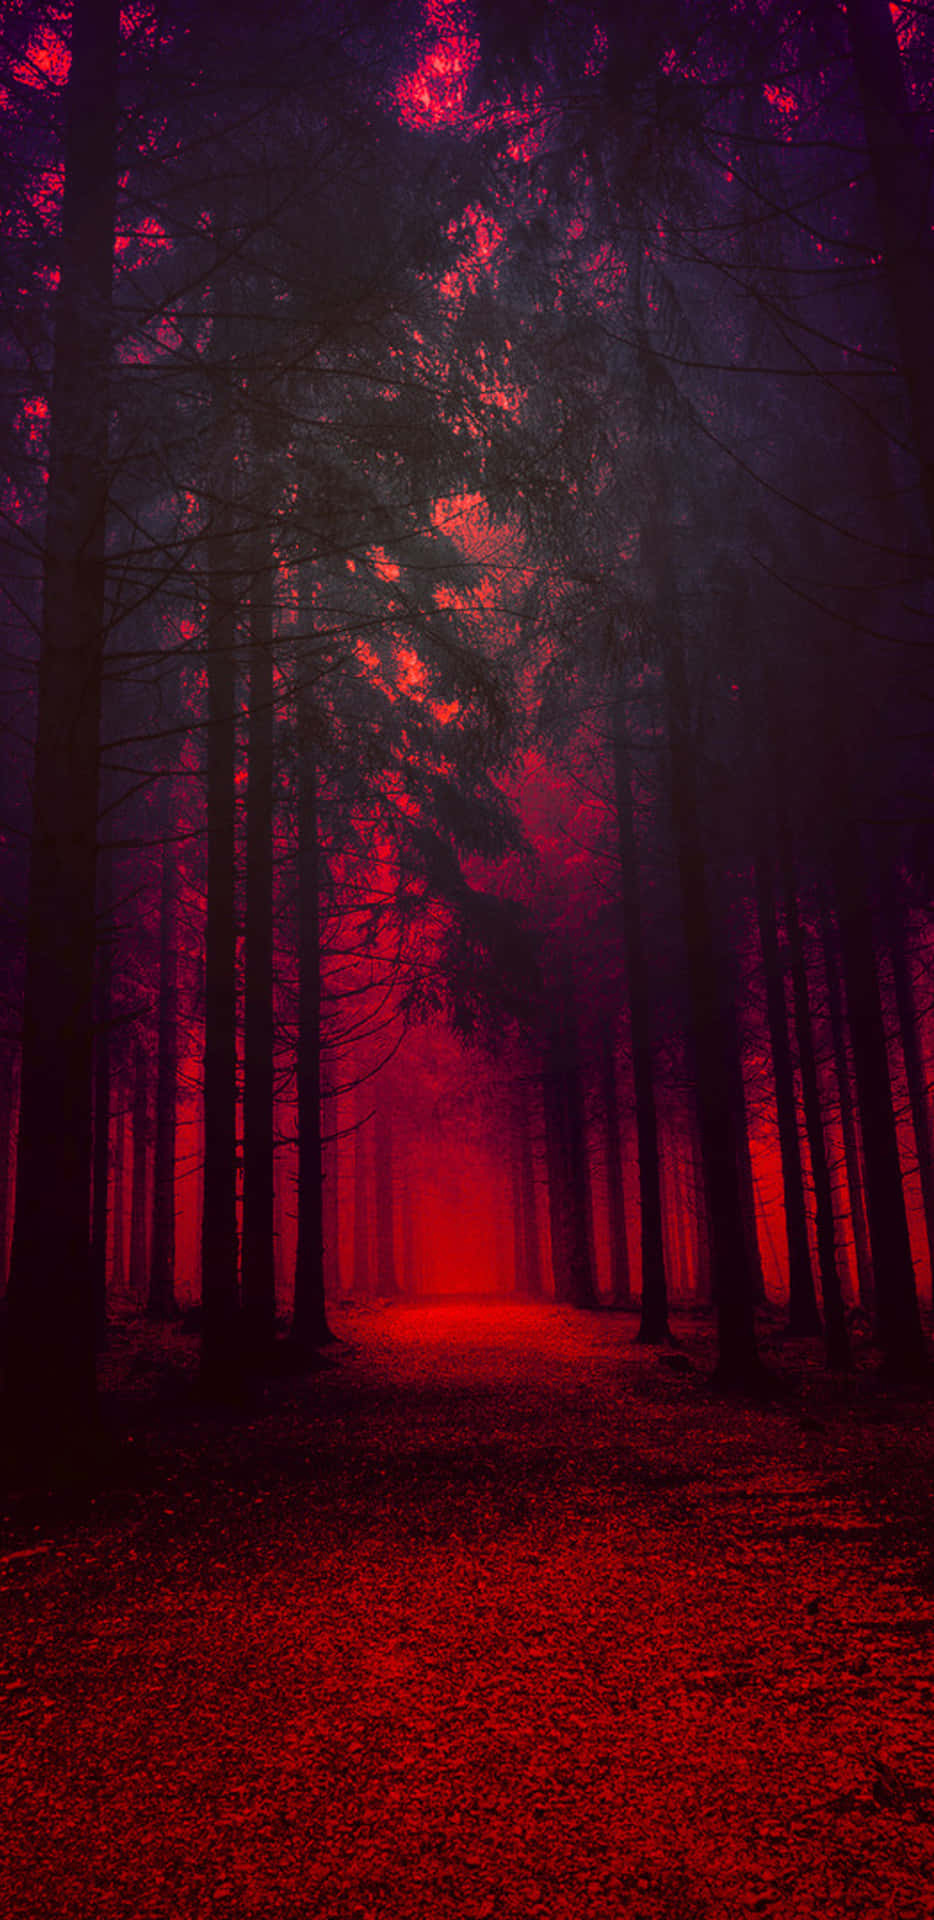 "Walk Thru the Magic of the Red Forest" Wallpaper